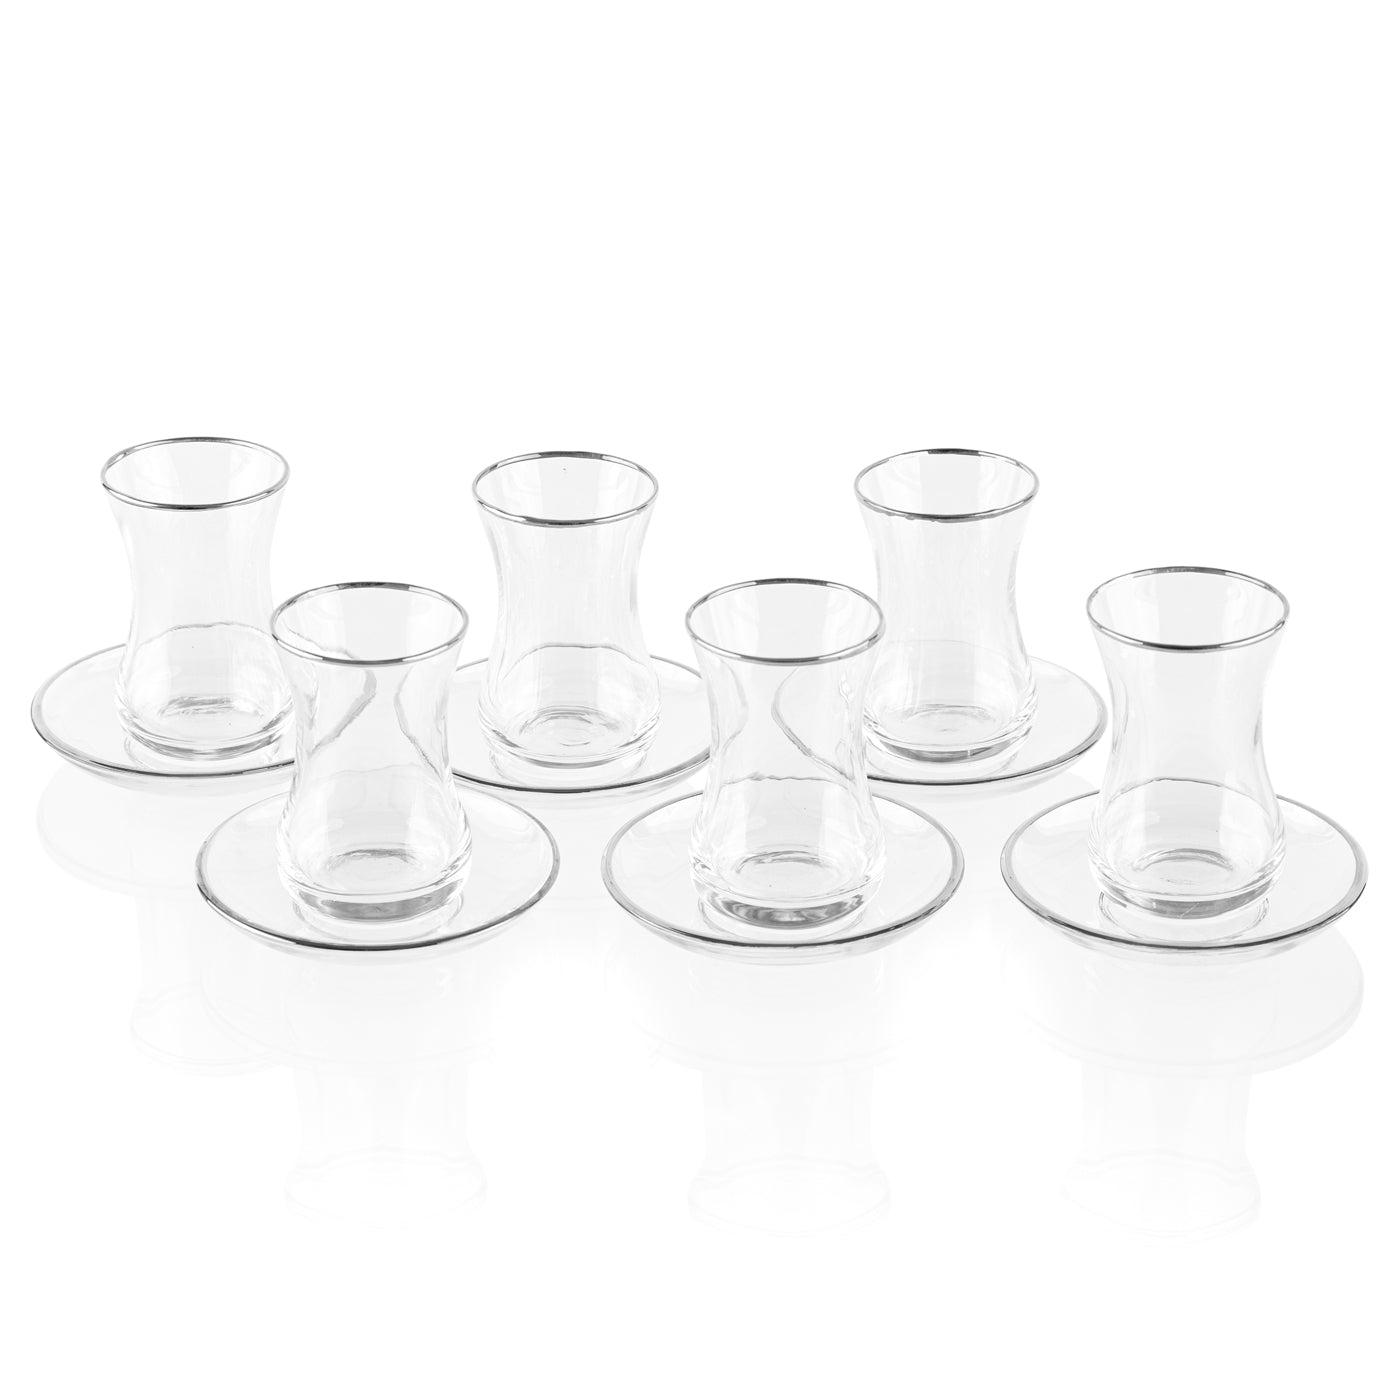 Classic Glass Cups and Saucers